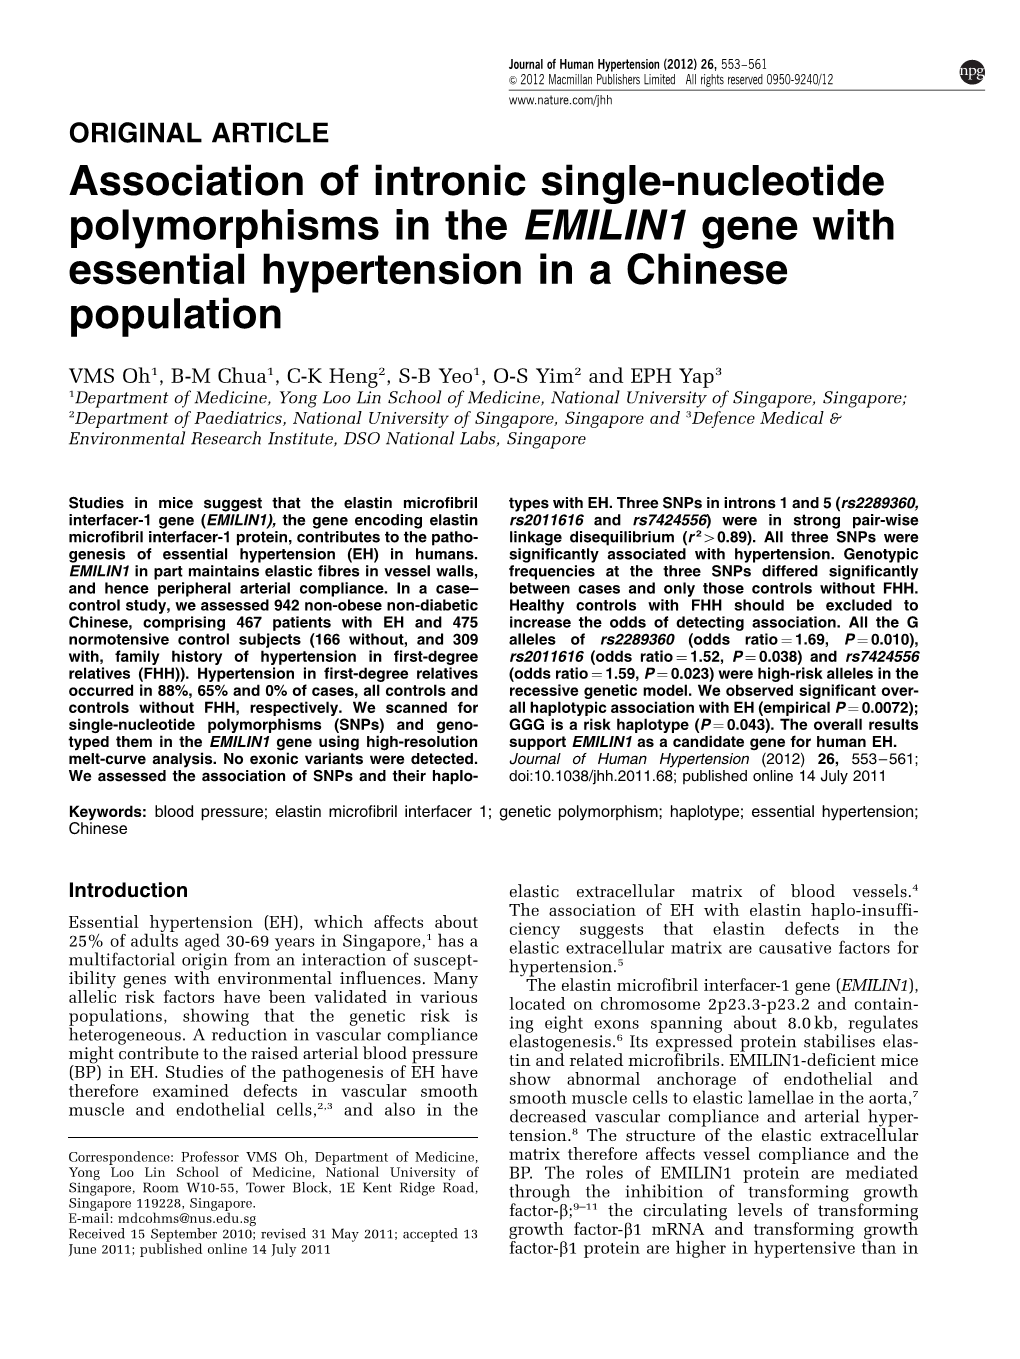 Association of Intronic Single-Nucleotide Polymorphisms in the EMILIN1 Gene with Essential Hypertension in a Chinese Population